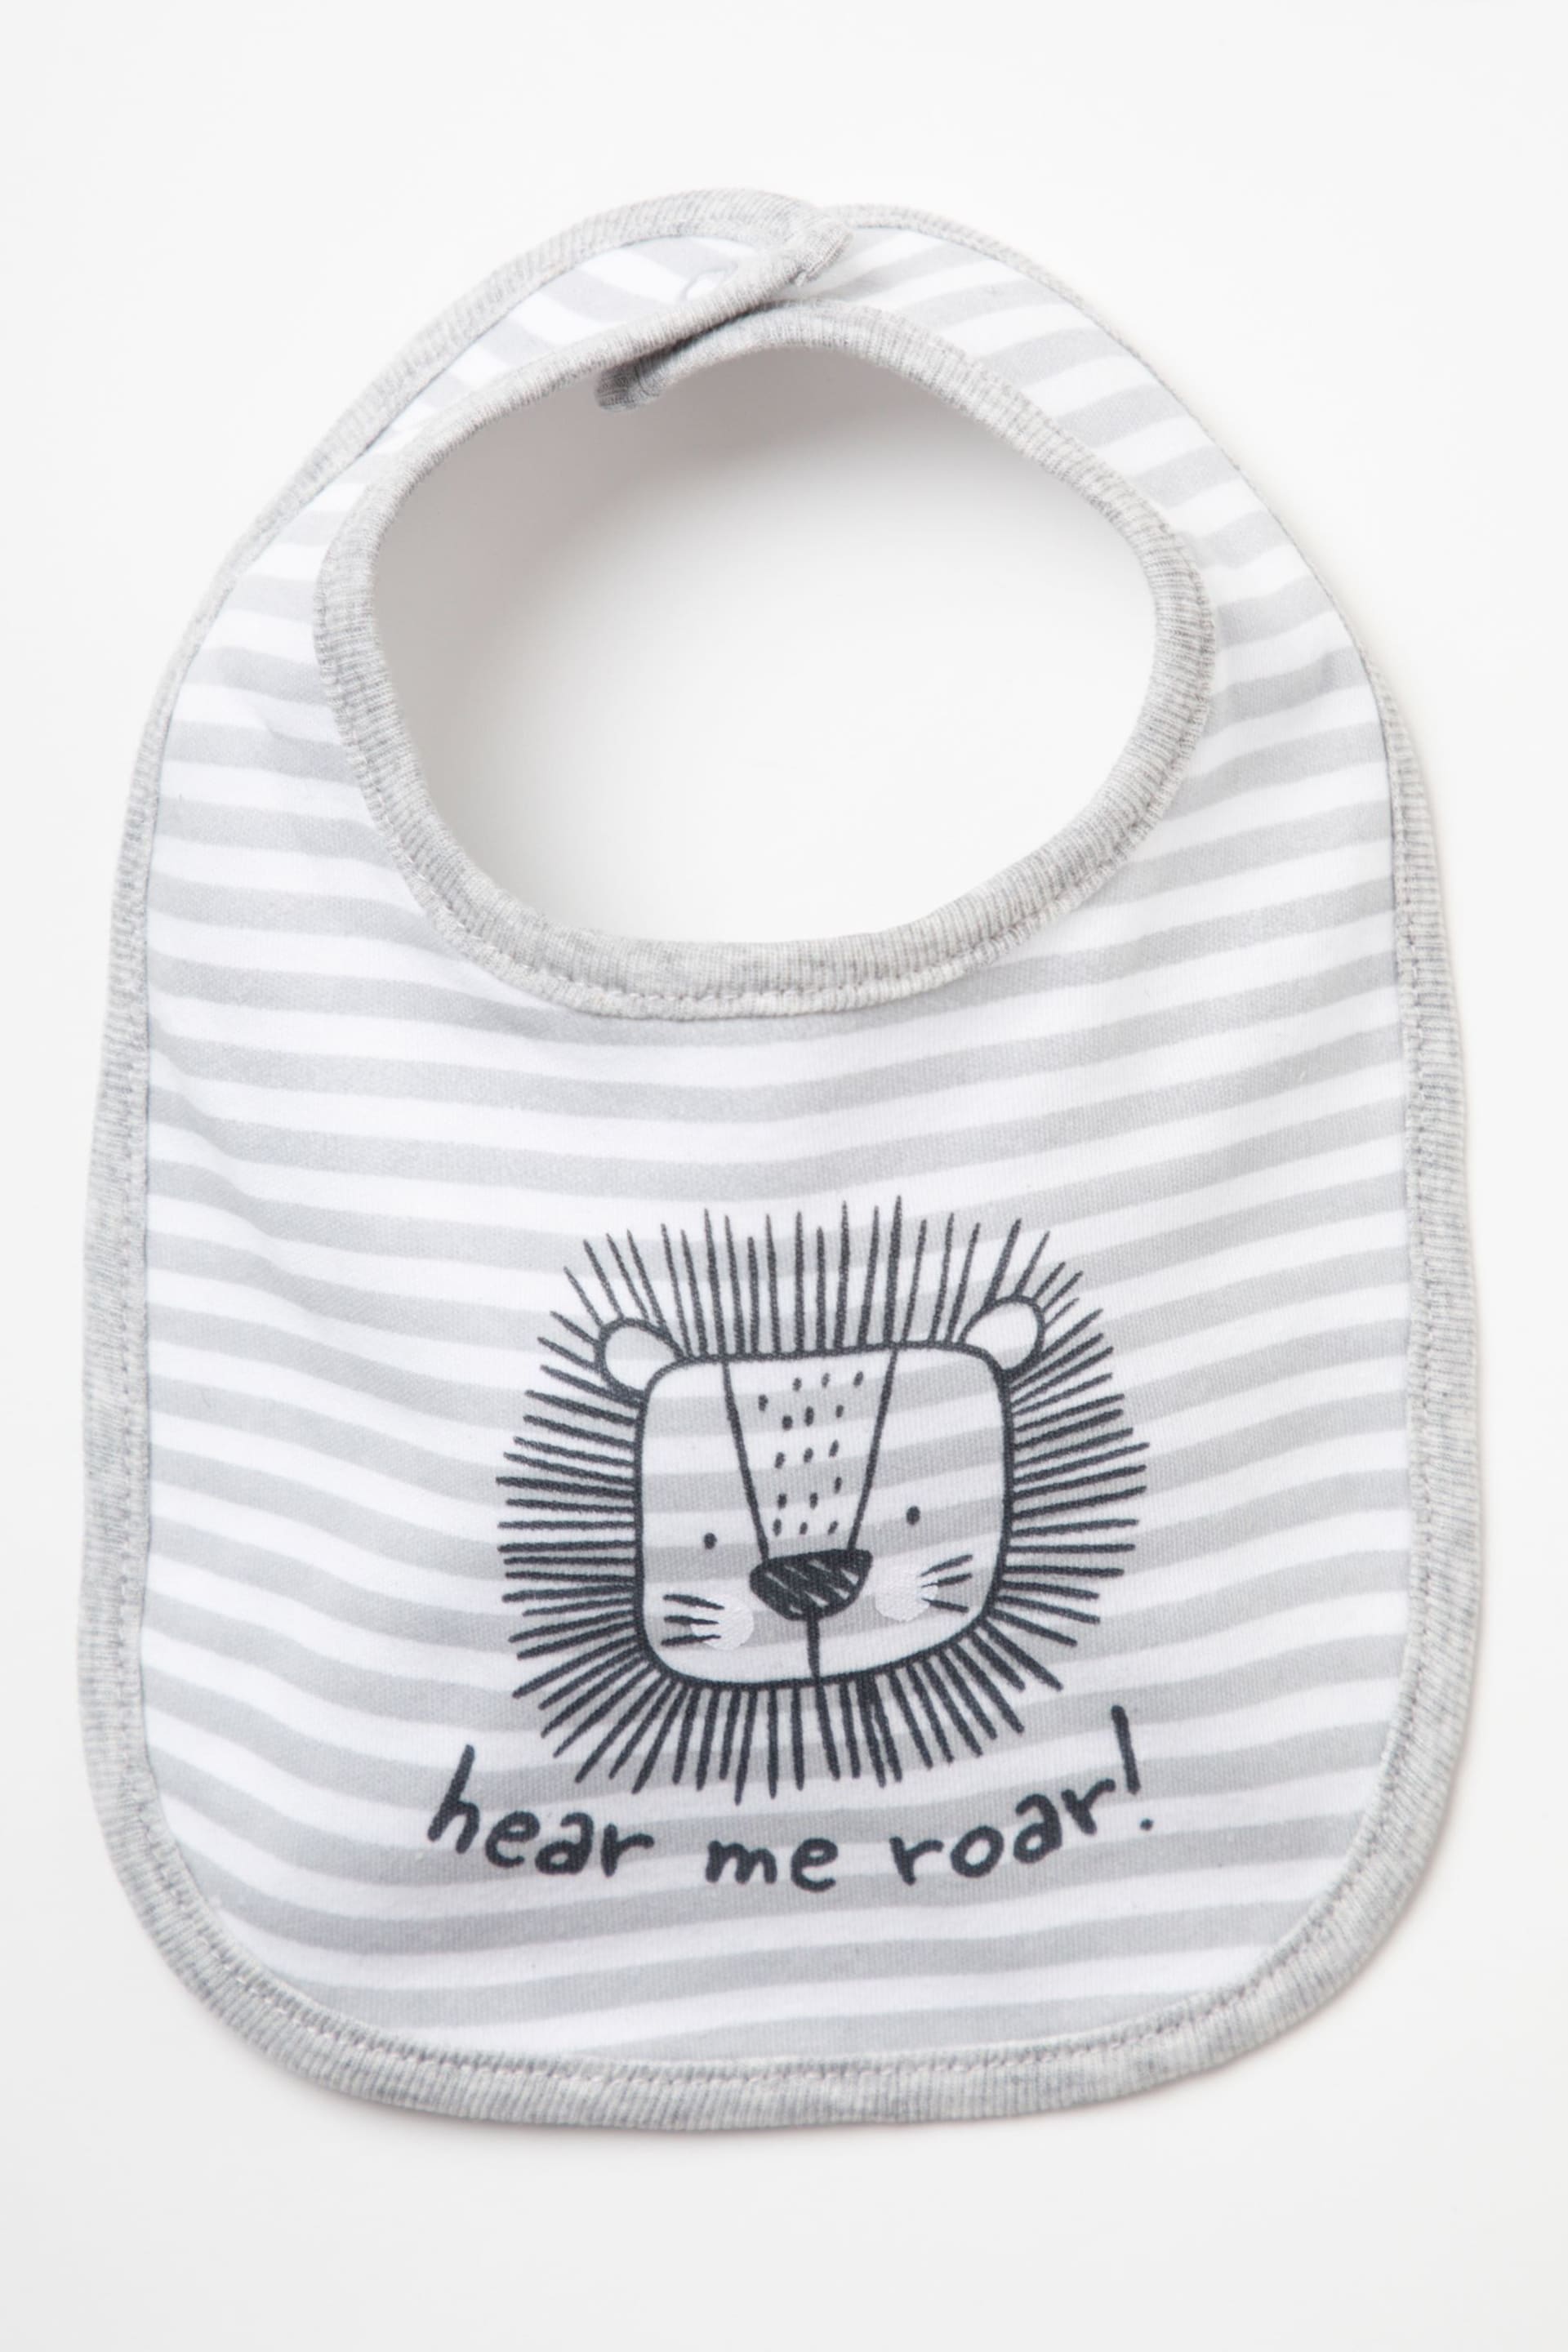 Little Gent Grey Lion Print Cotton 3-Piece Baby Gift Set - Image 4 of 5